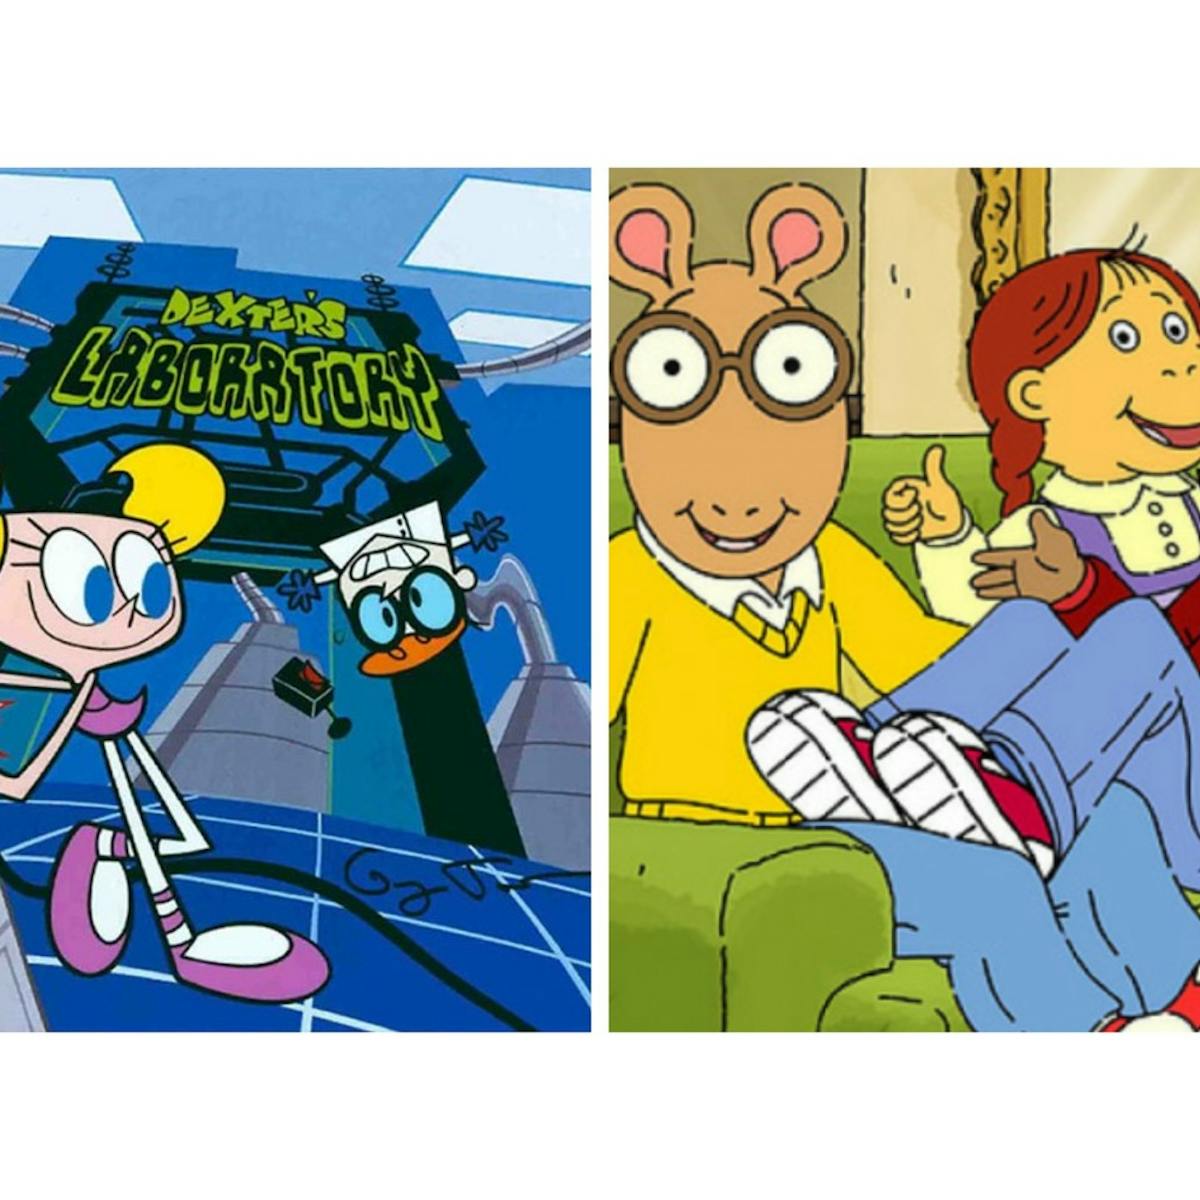 30 Cartoons From the '00s That We Really Miss - Netmums